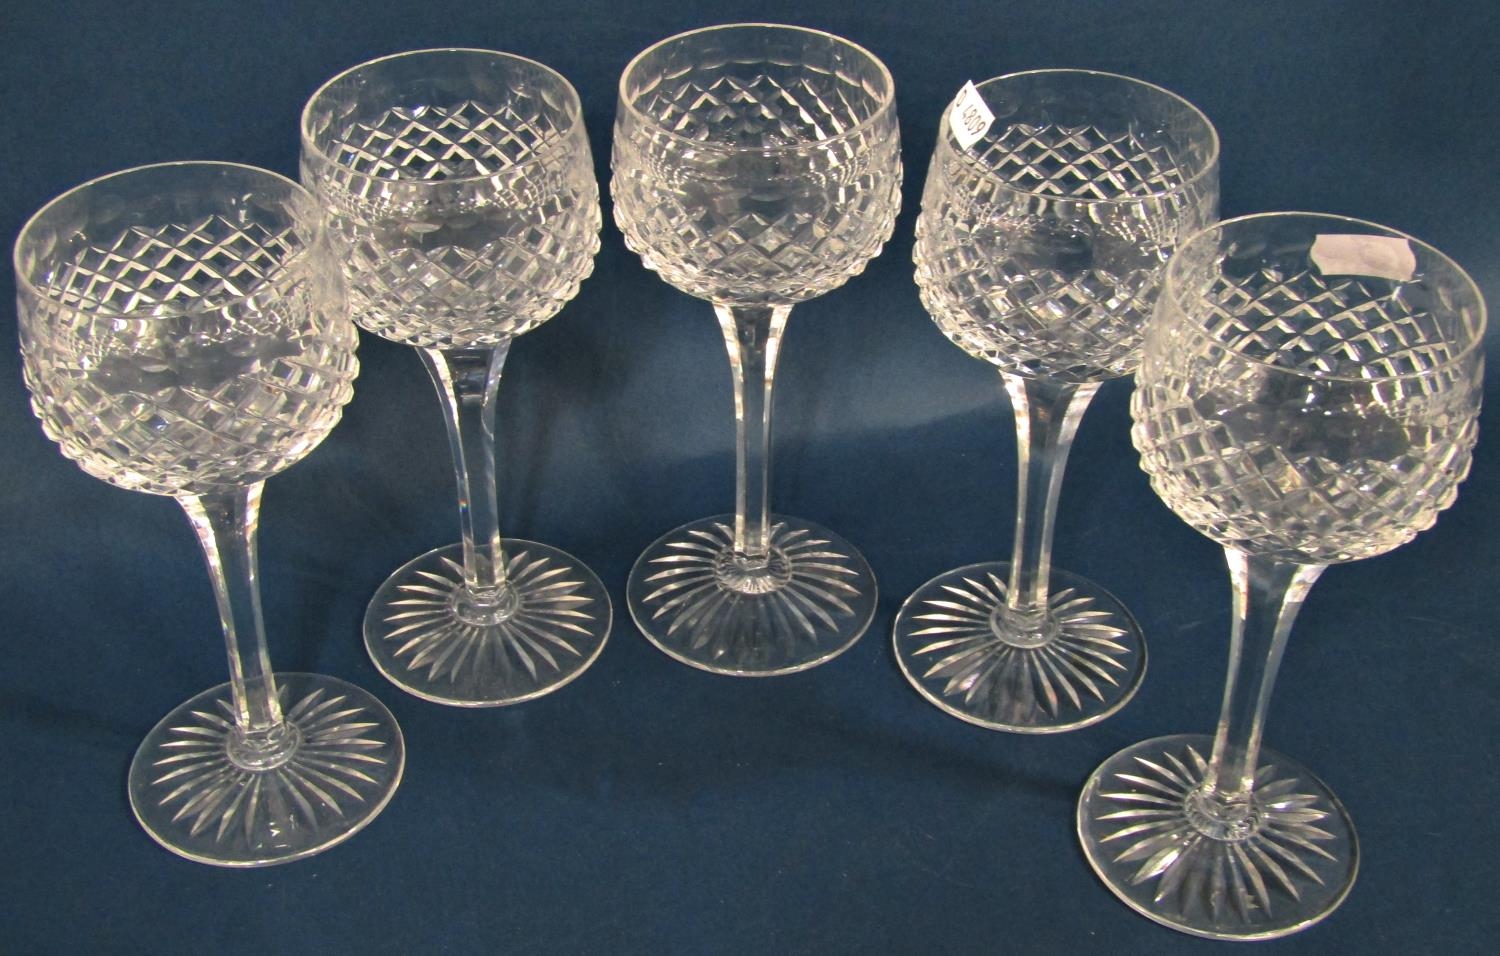 Six amber glass hock wine glasses with etched vine leaf decoration, five cut glass wine glass, and a - Image 3 of 3